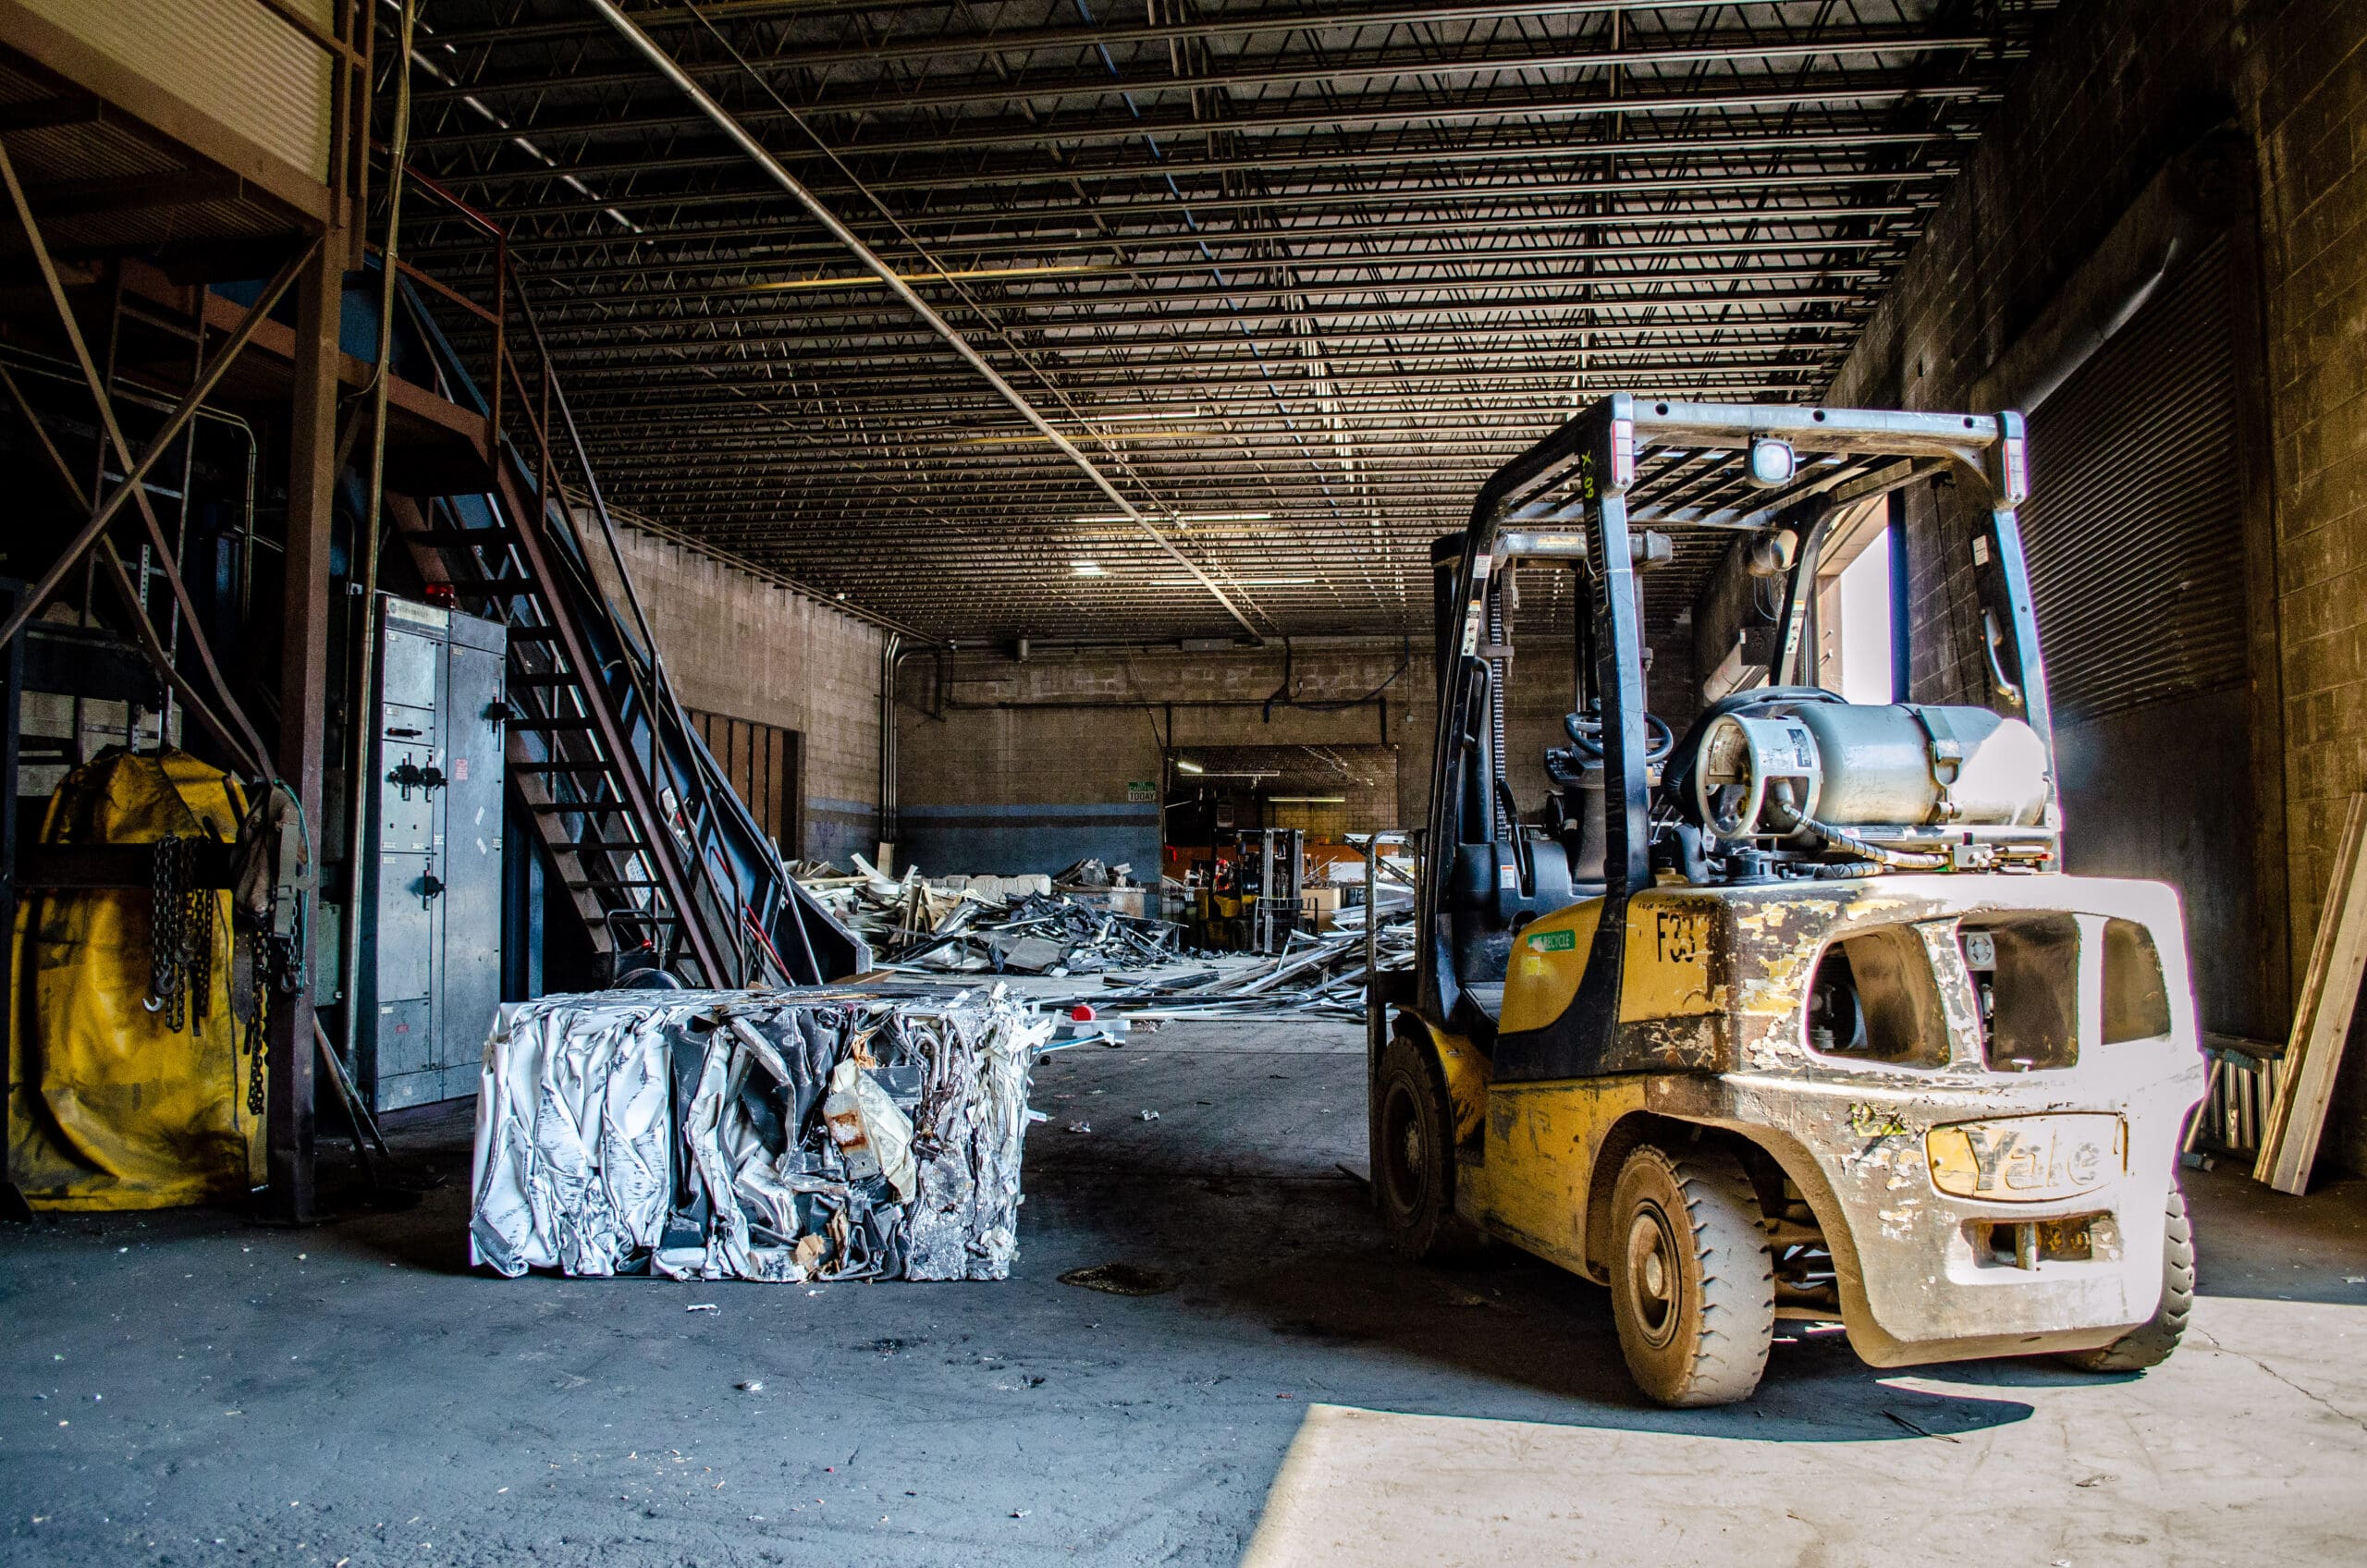 A forklift parked in a warehouse, ready for use.